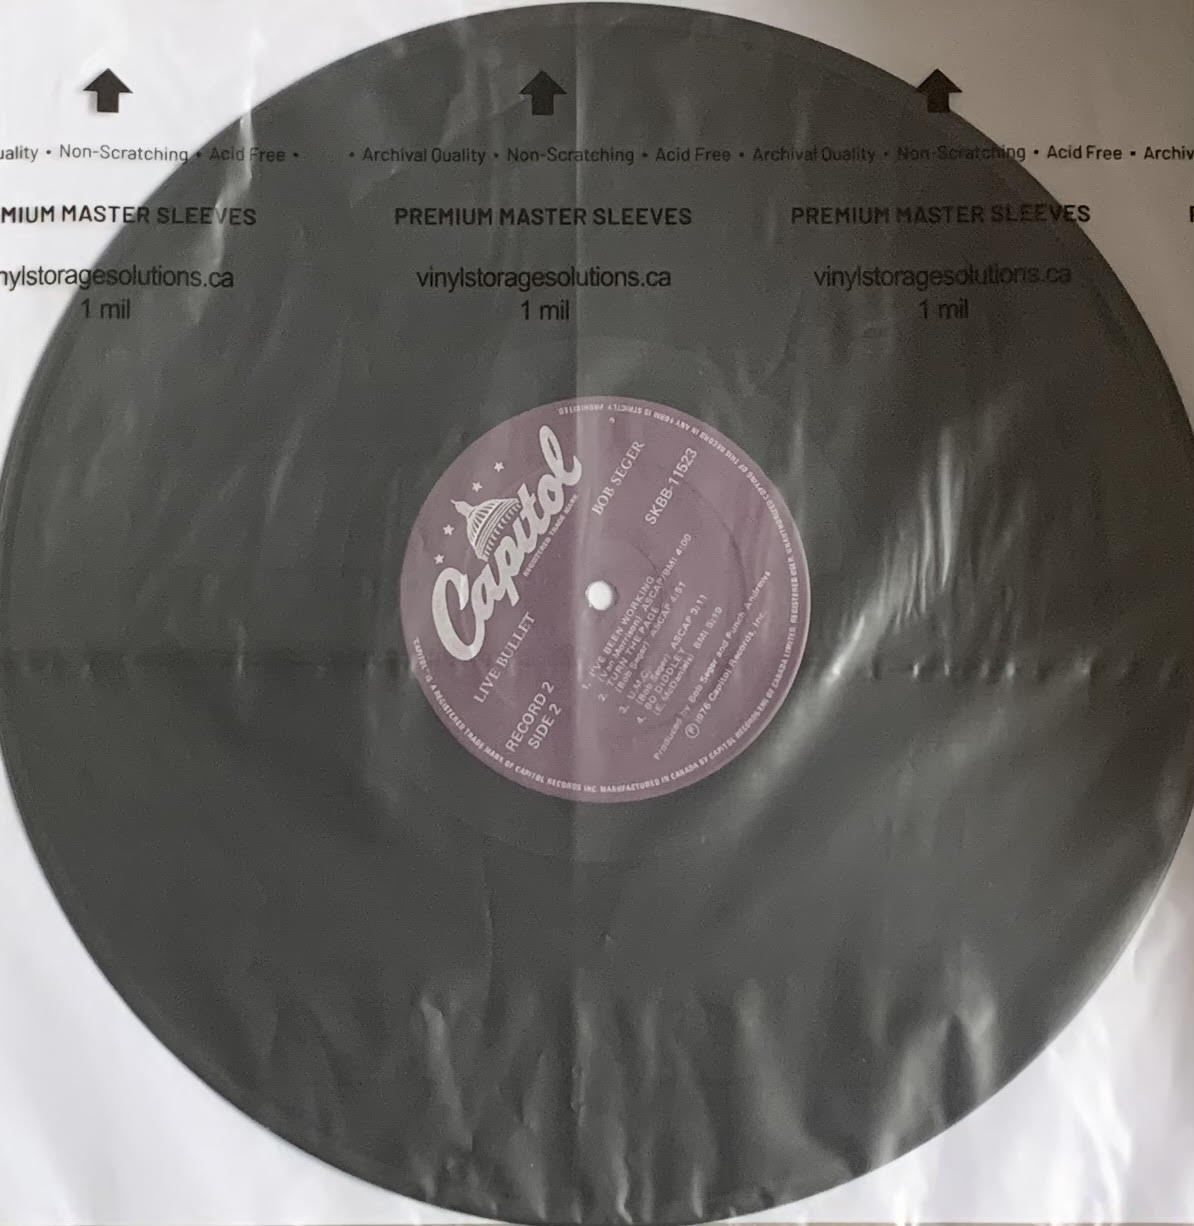 12 inch- 1 mil "rice paper" inner sleeves - 25 pieces